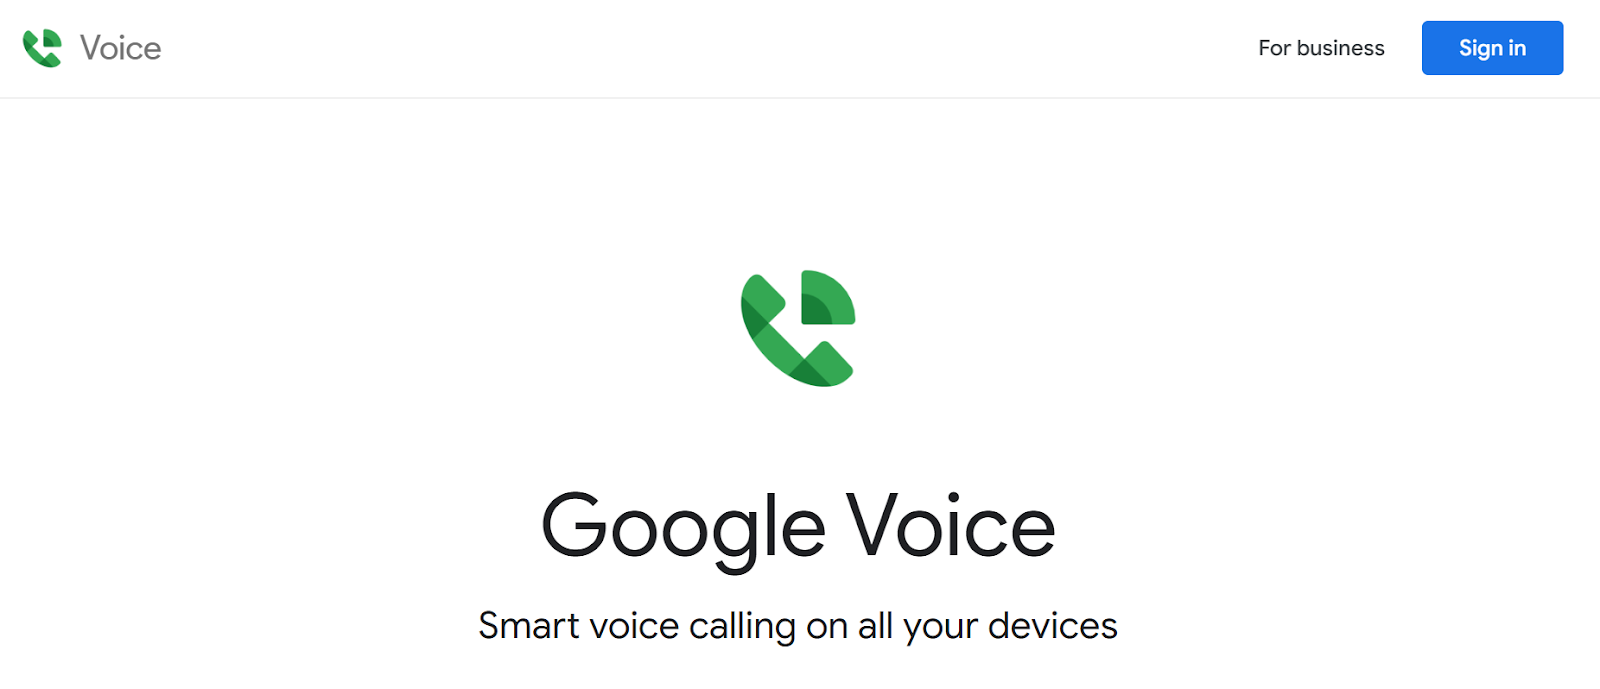 Google Voice website snapshot highlighting the services it offers.